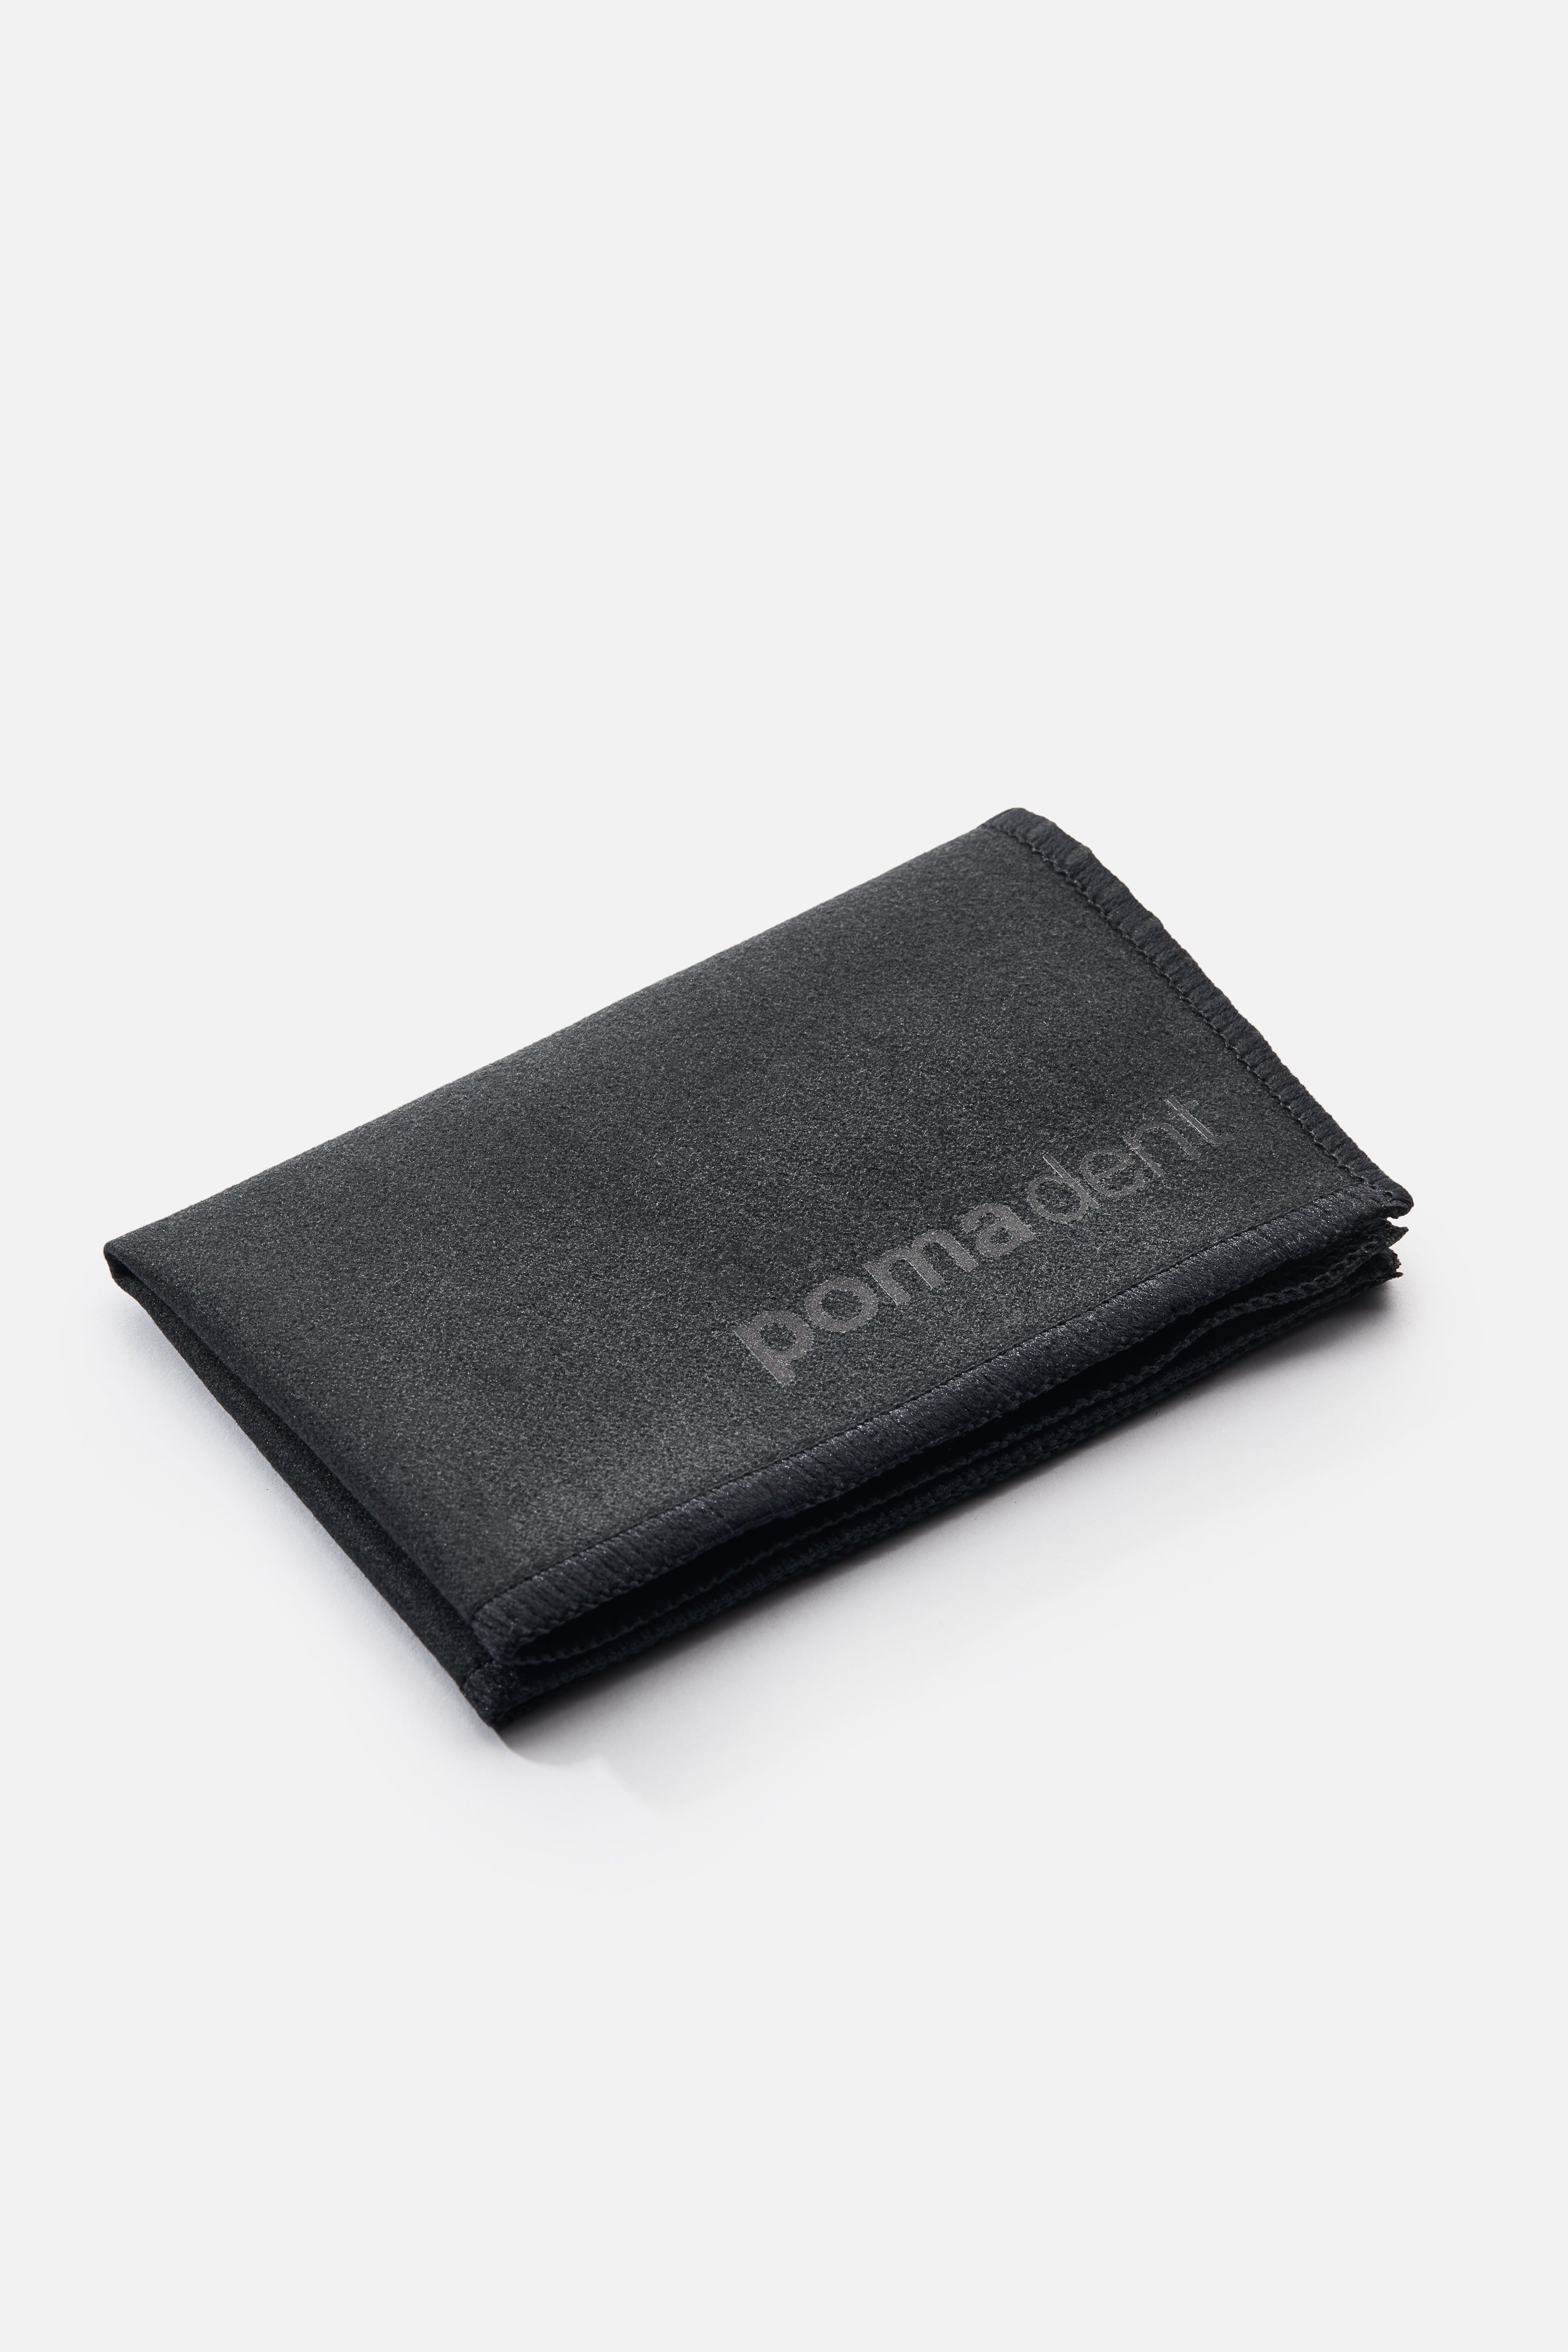 Pomacloth - Microfibre Cleaning Cloth - Black